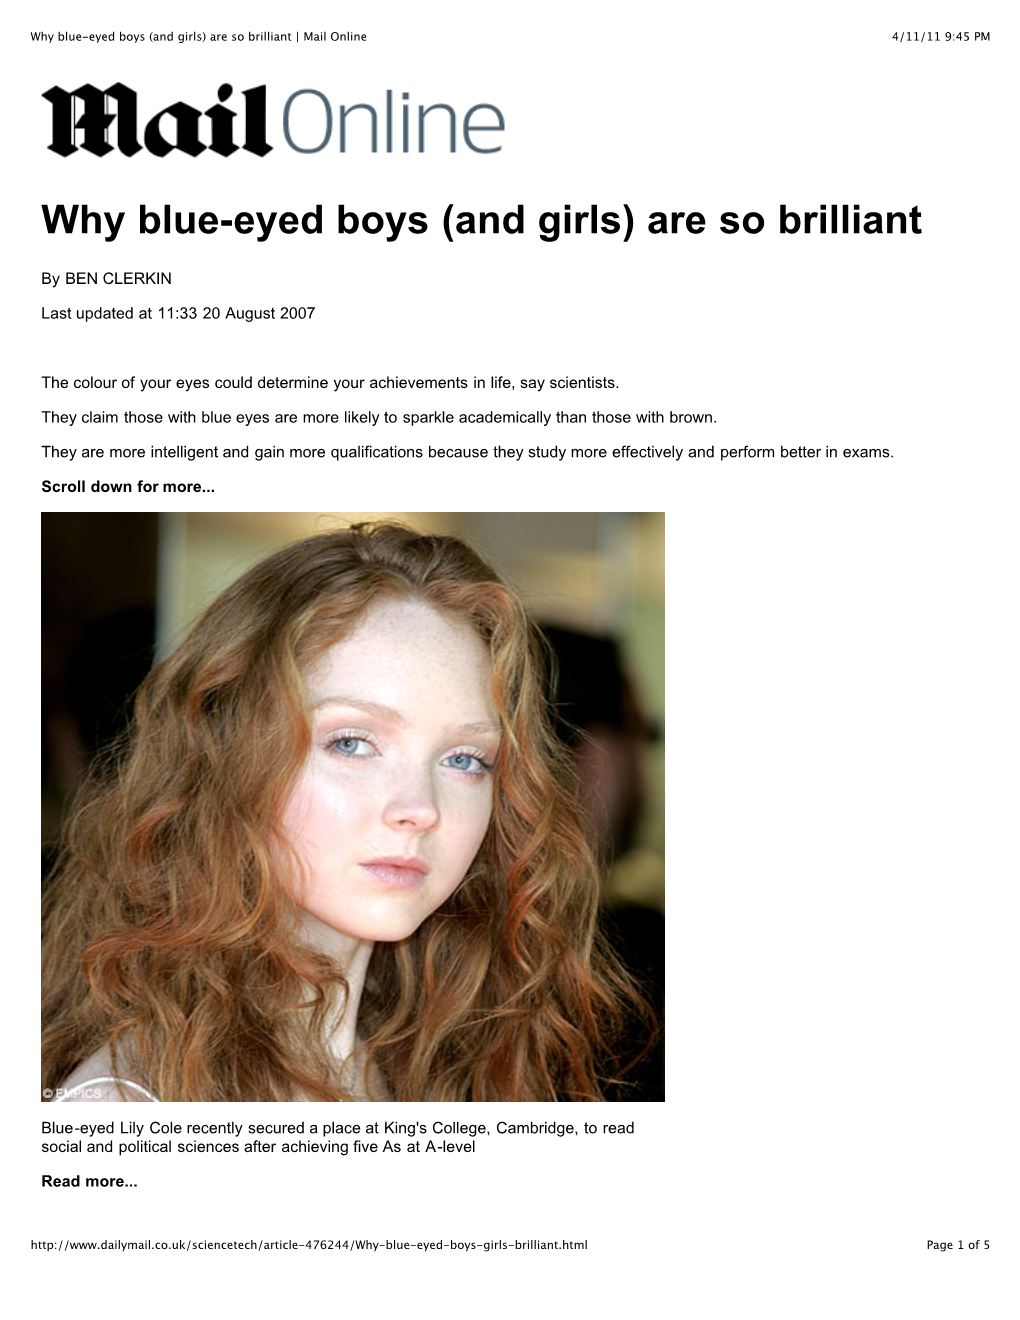 Clerkin, Ben. "Why Blue-Eyed Boys (And Girls) Are So Brilliant." Daily Mail, Aug. 20, 2007